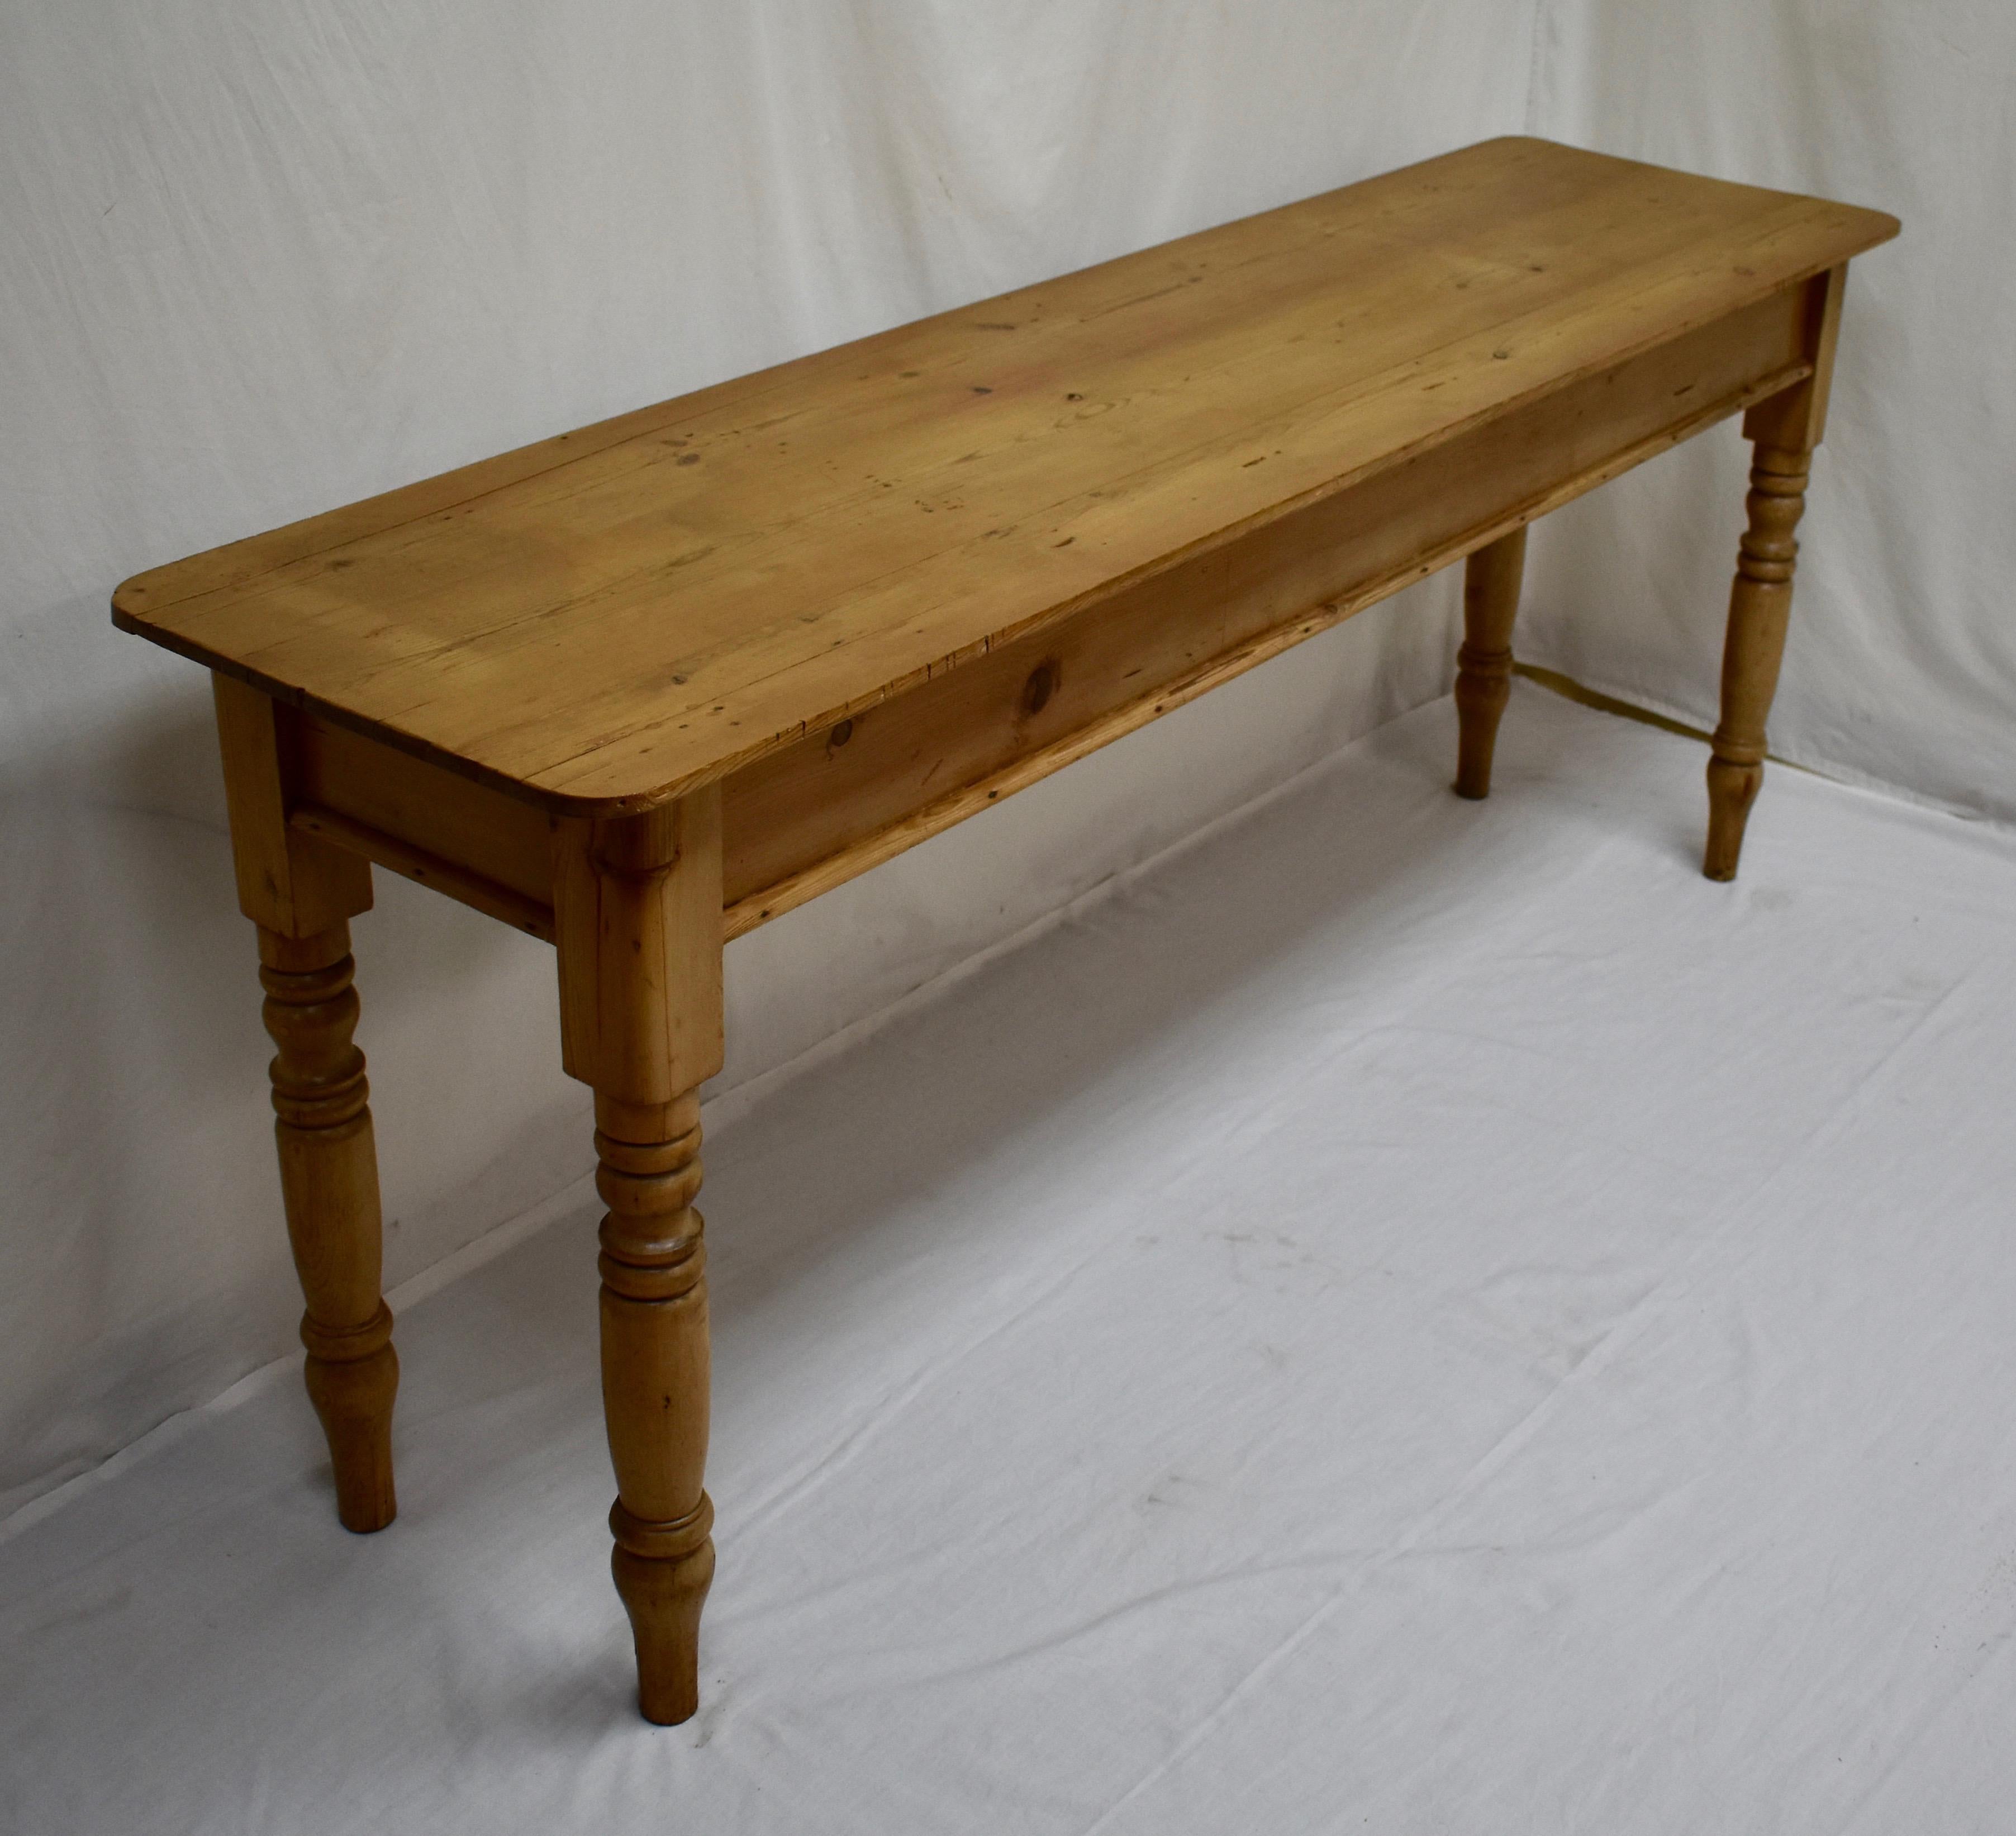 Country English Pine Turned Leg Side Table